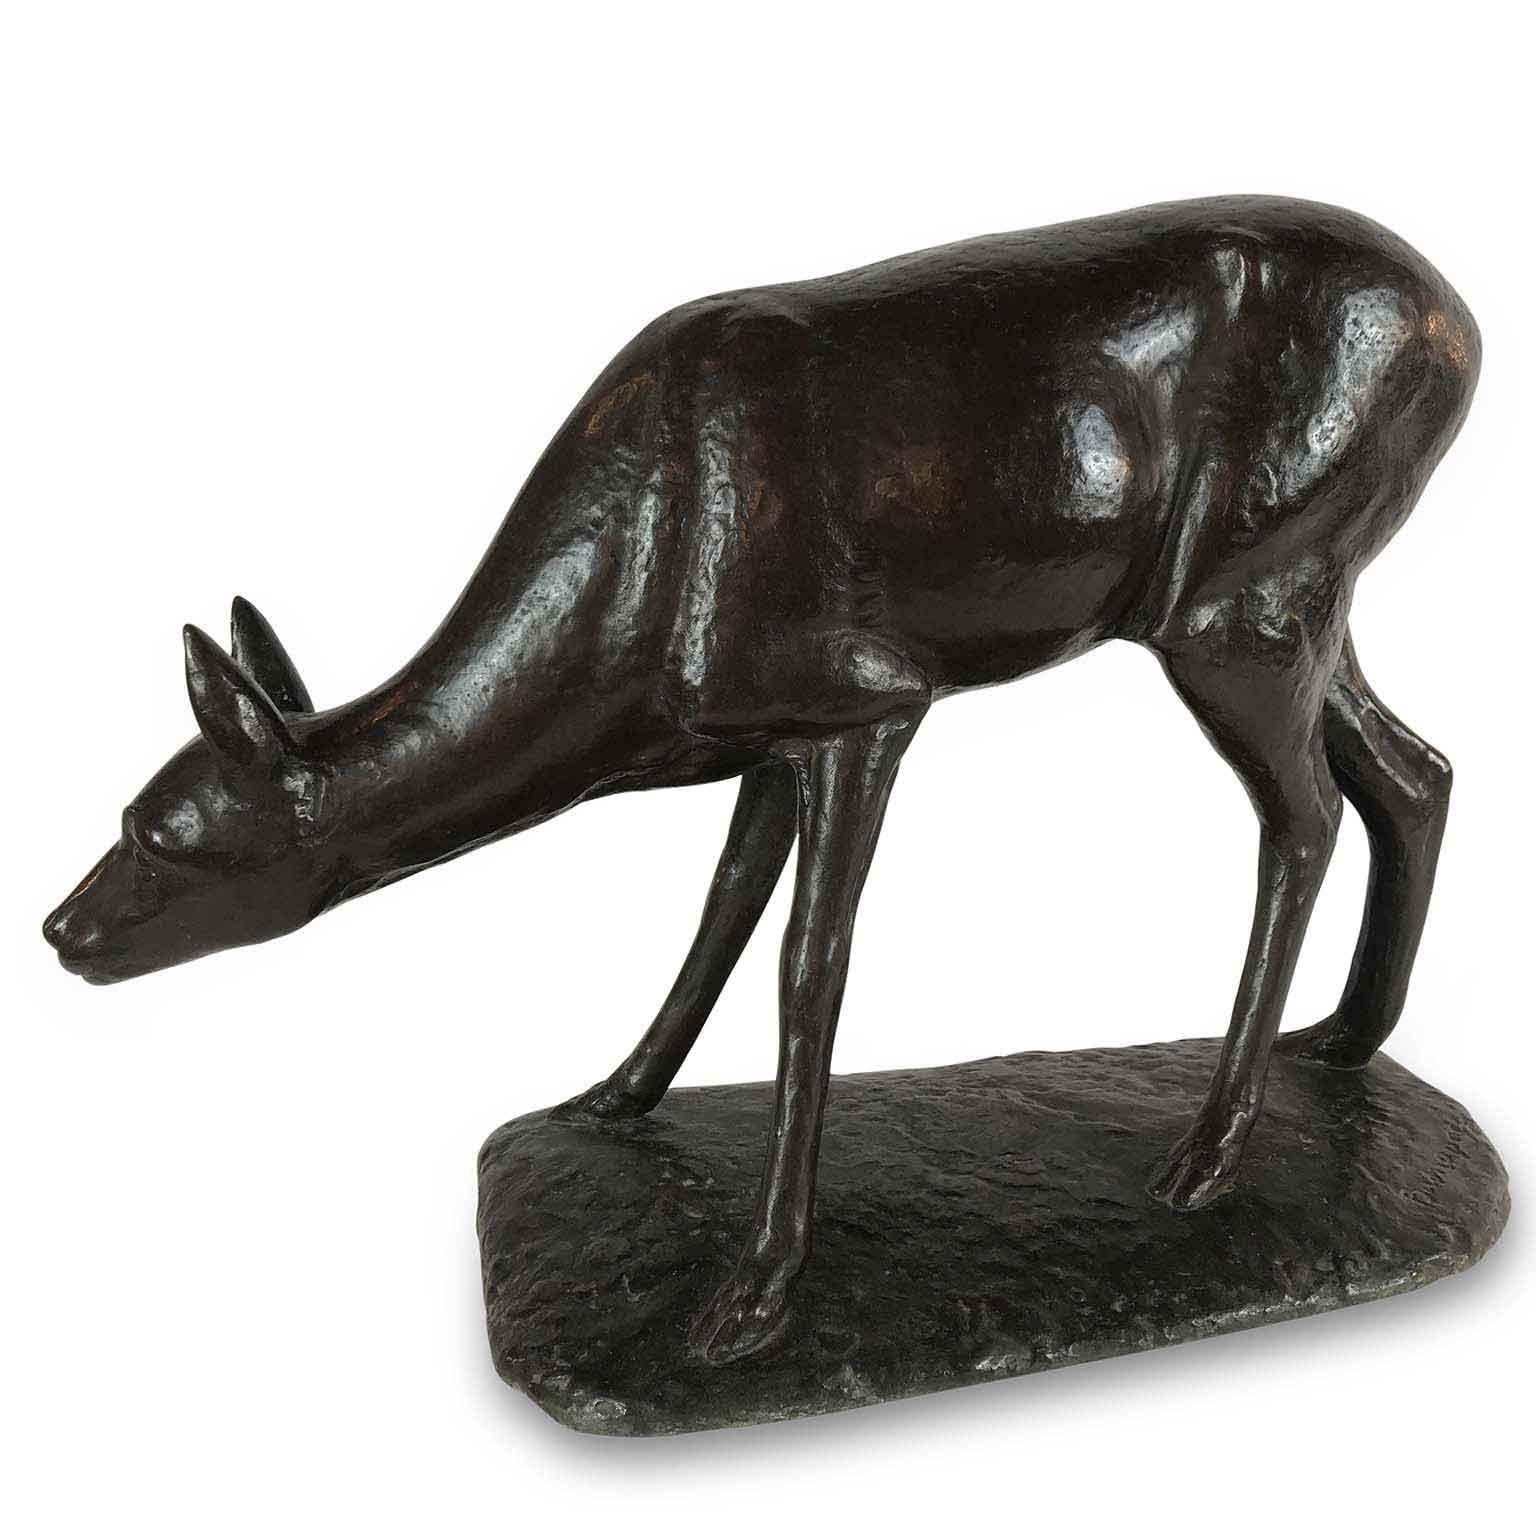 An Italian animalier bronze casting sculpture of a female roe deer, standing on an oval shaped bronze base and signed Buonapace near the left hind leg by the Italian artist Francesco Buonapace (Lecce 1902- Bologna 1975). 
This animal sculpture is a